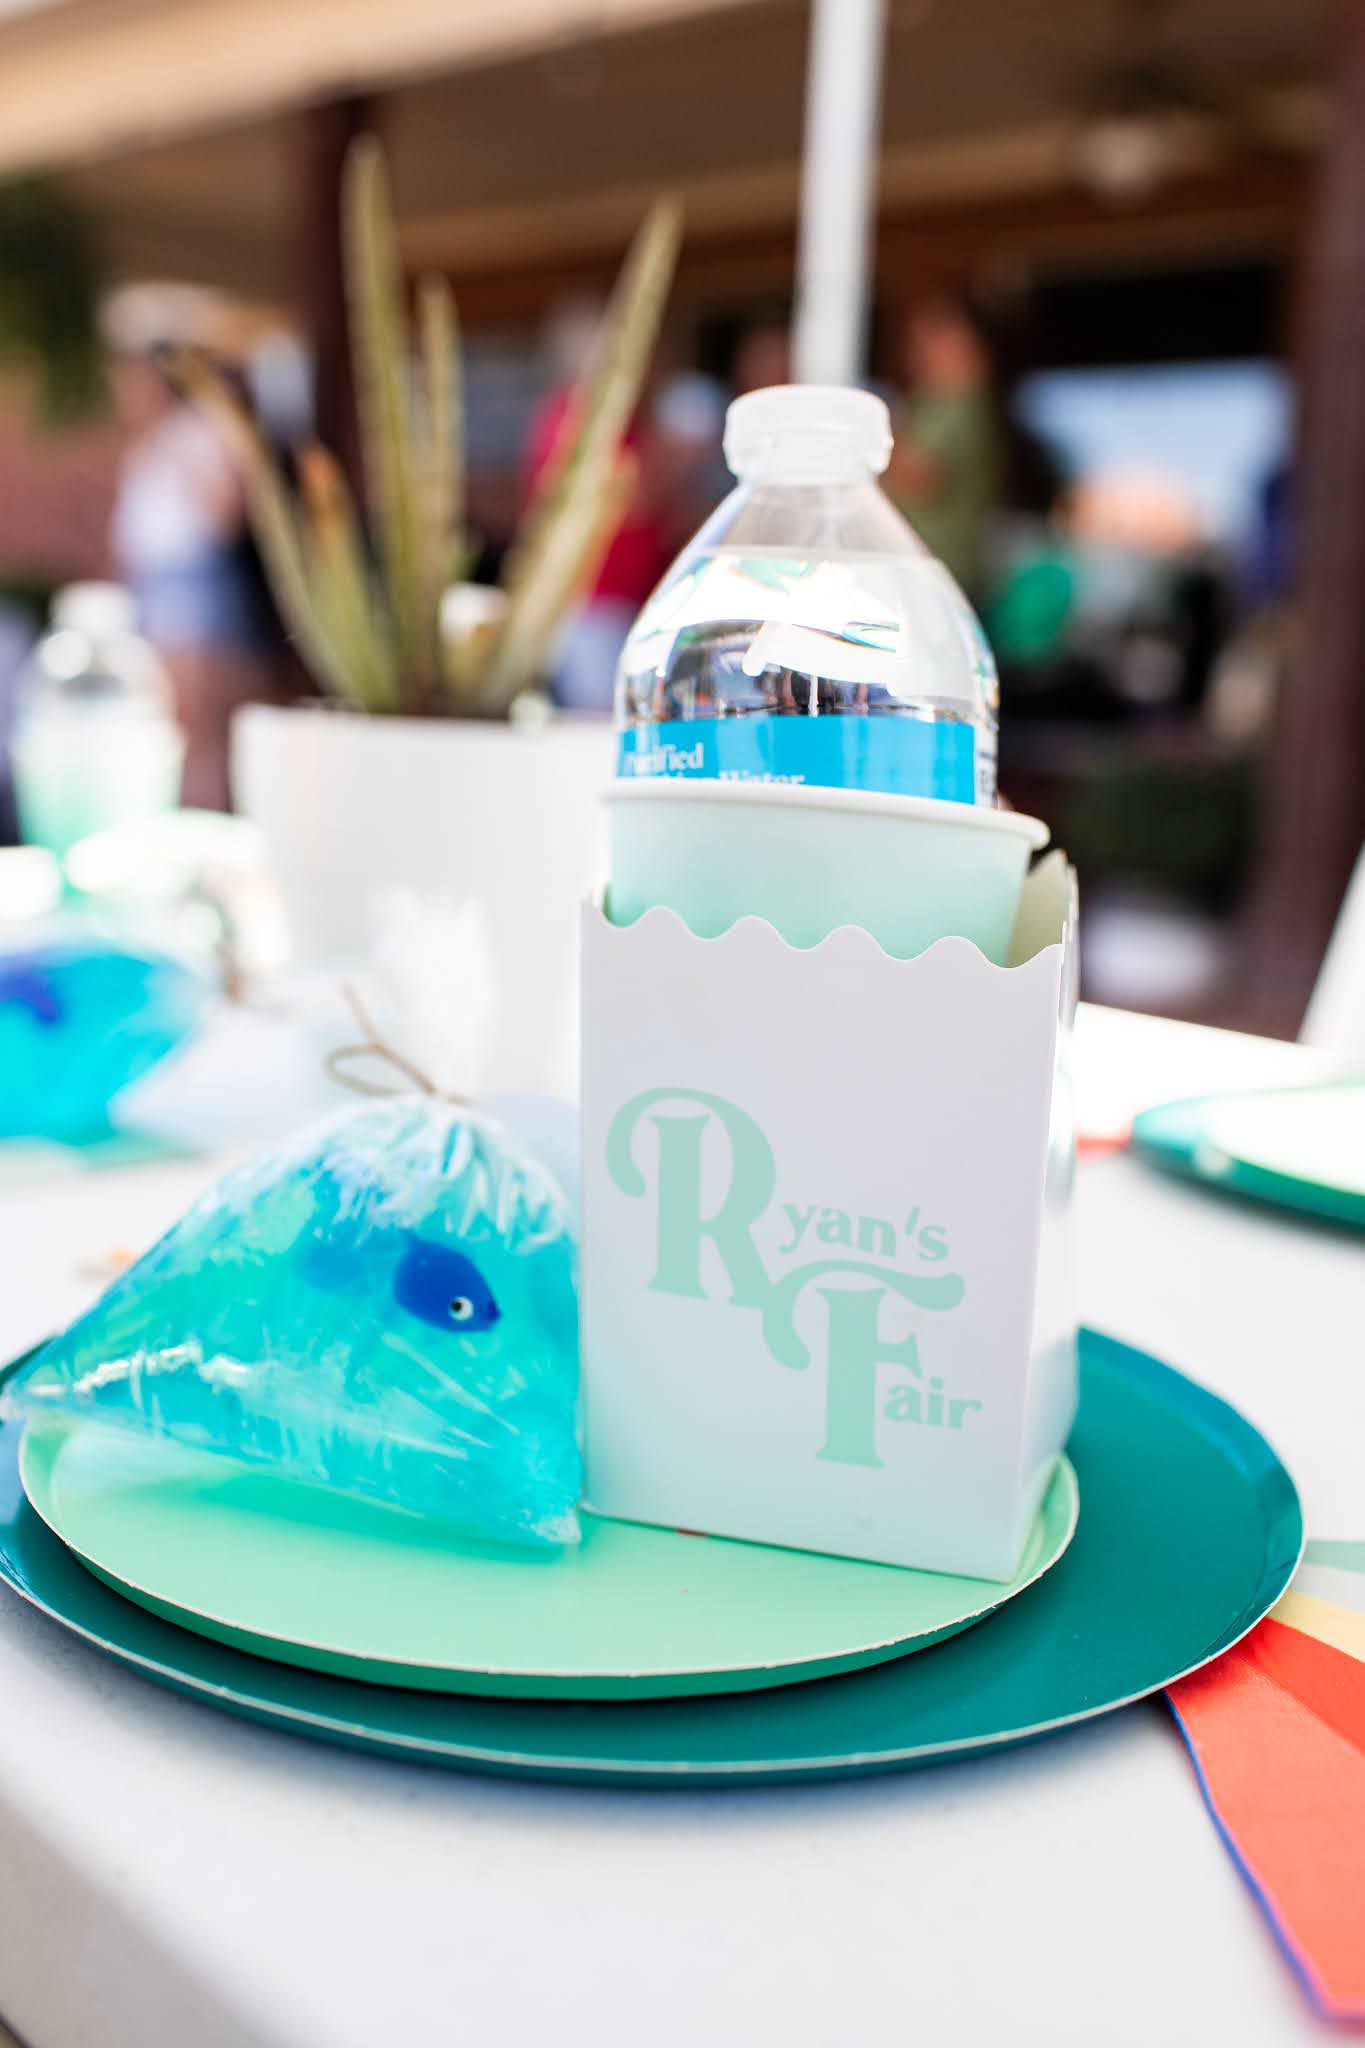 Table decor details with custom logo for fair themed birthday party with colorful napkins and fish in a bag soap favors